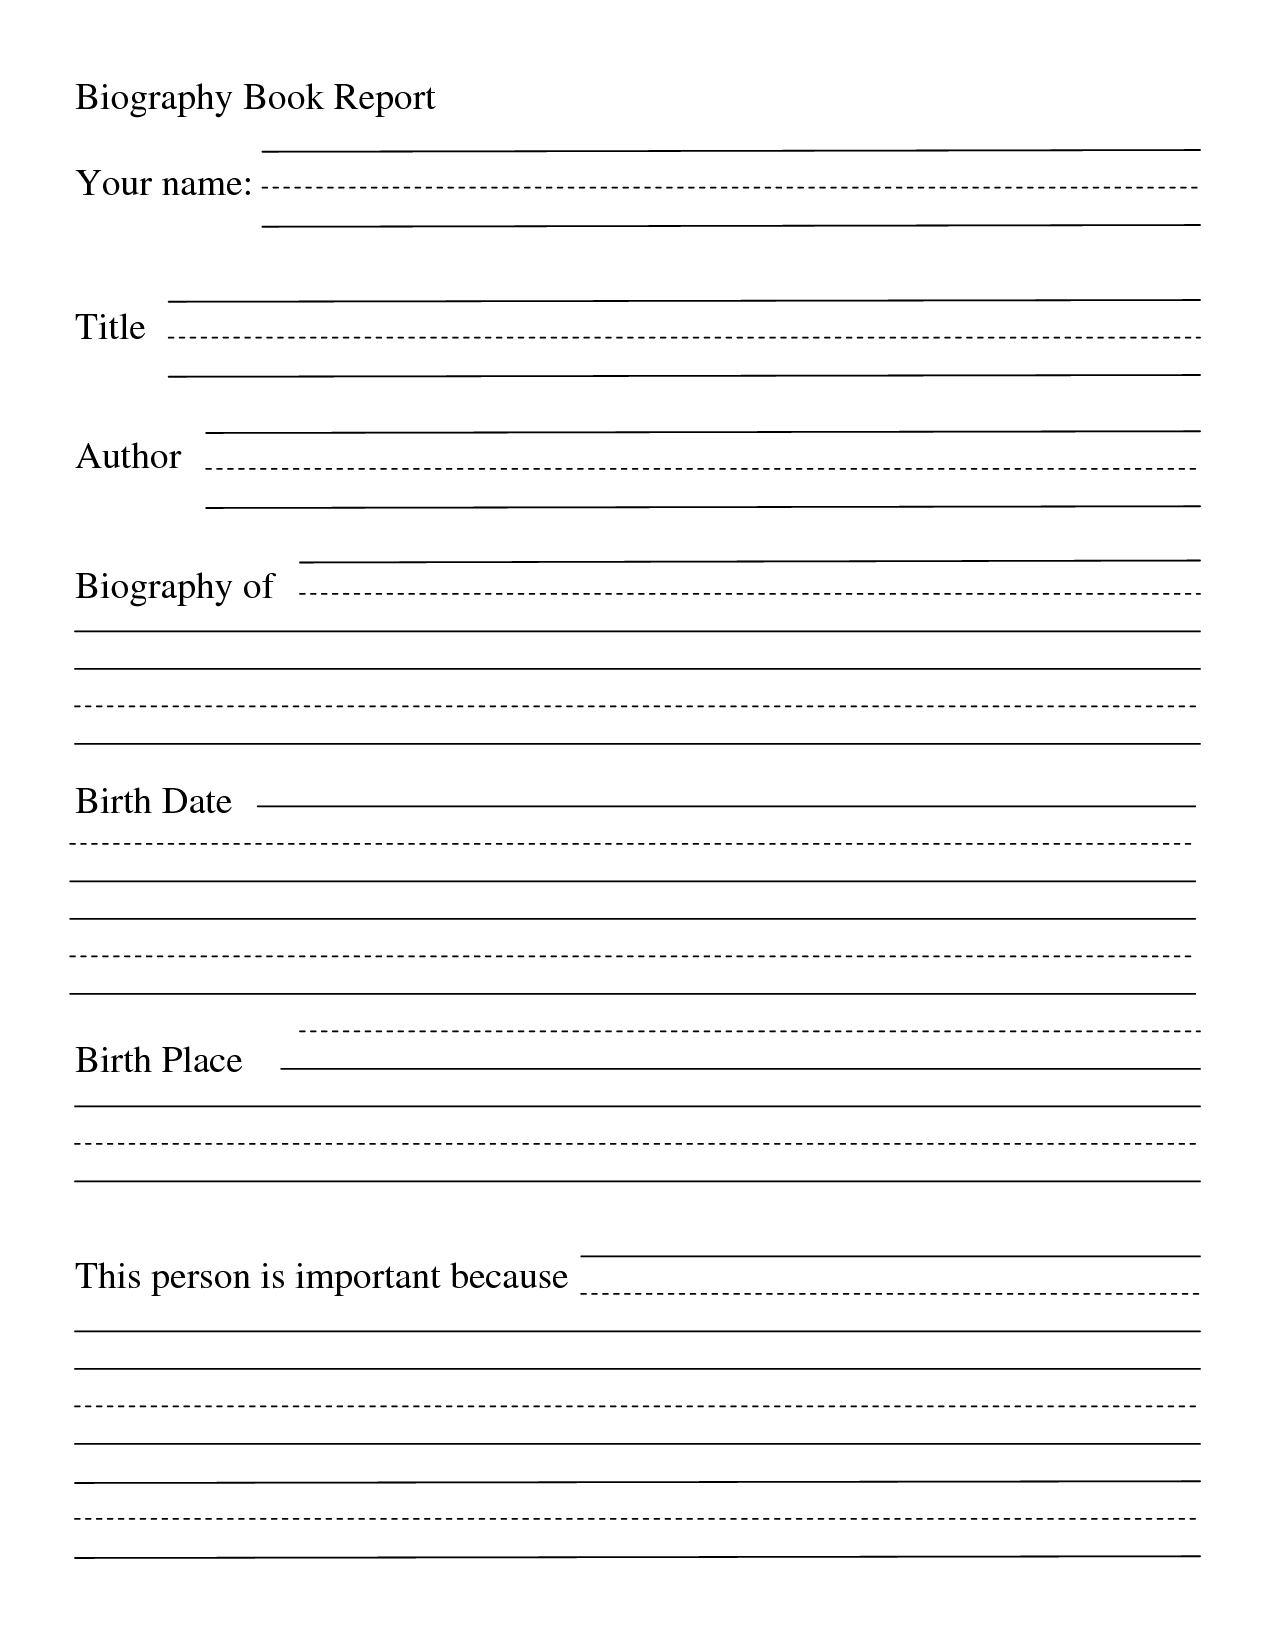 004 Biography Book Report Template Formidable Ideas Examples With Biography Book Report Template